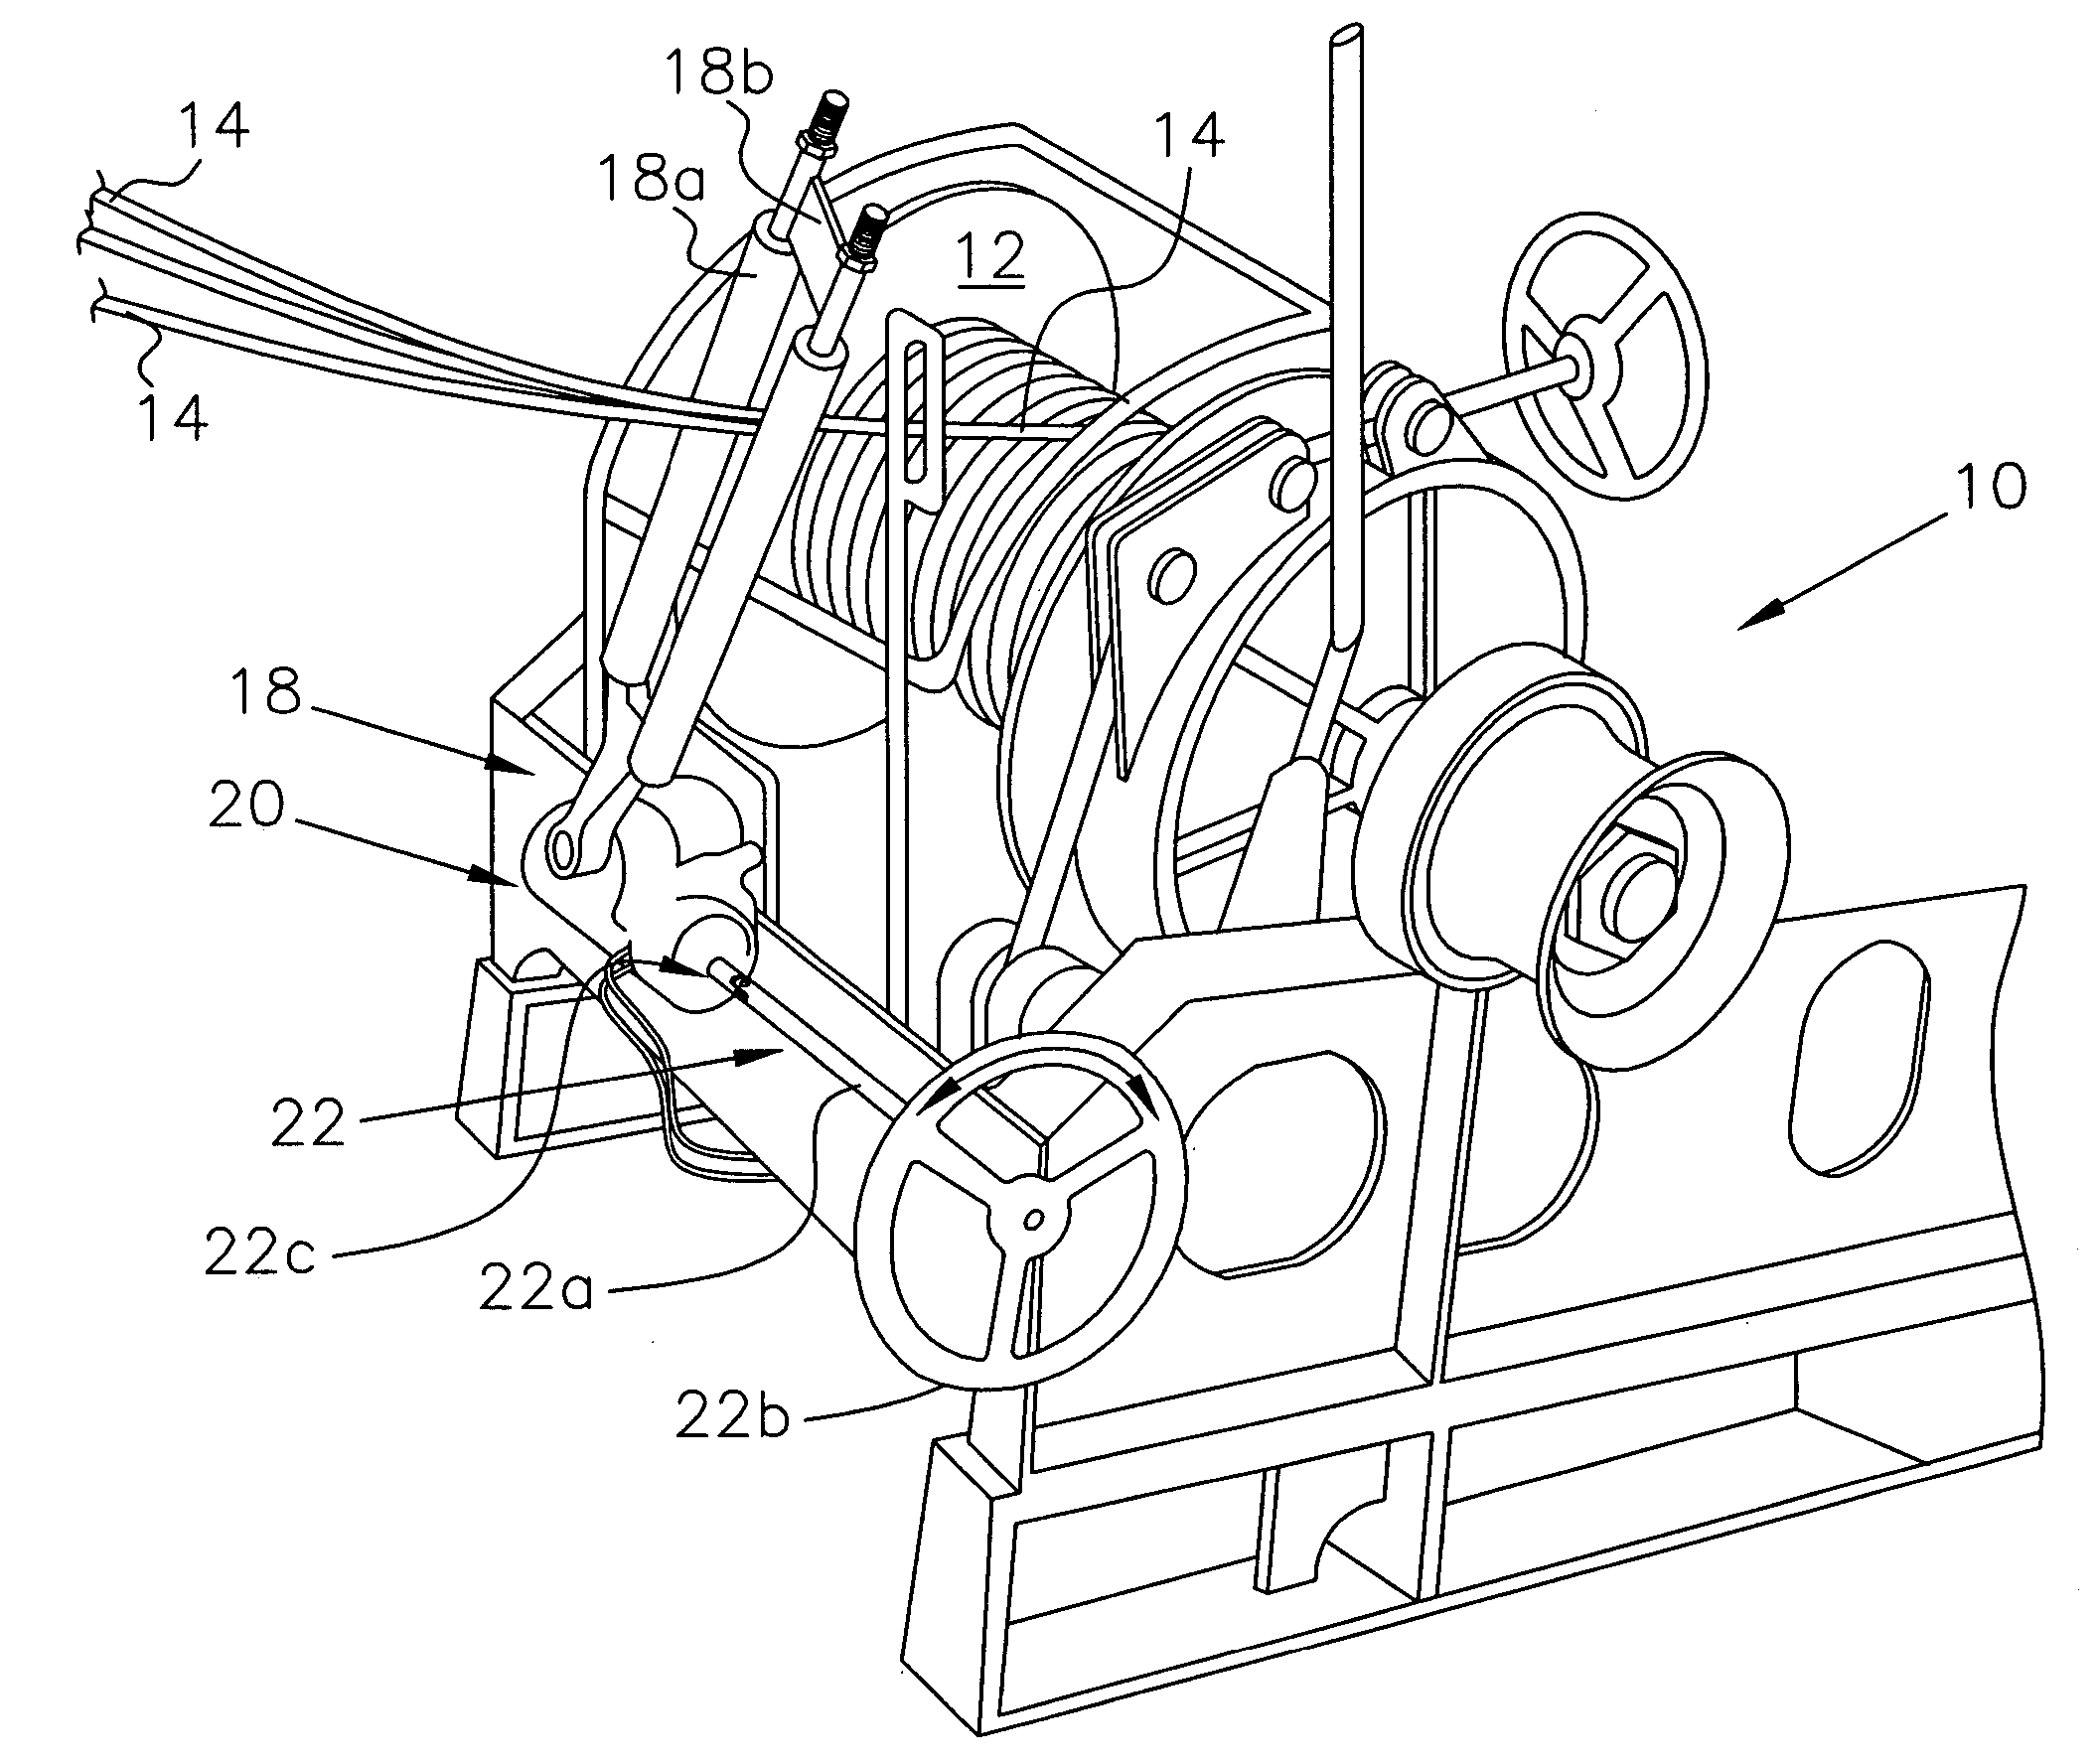 Cable winch system